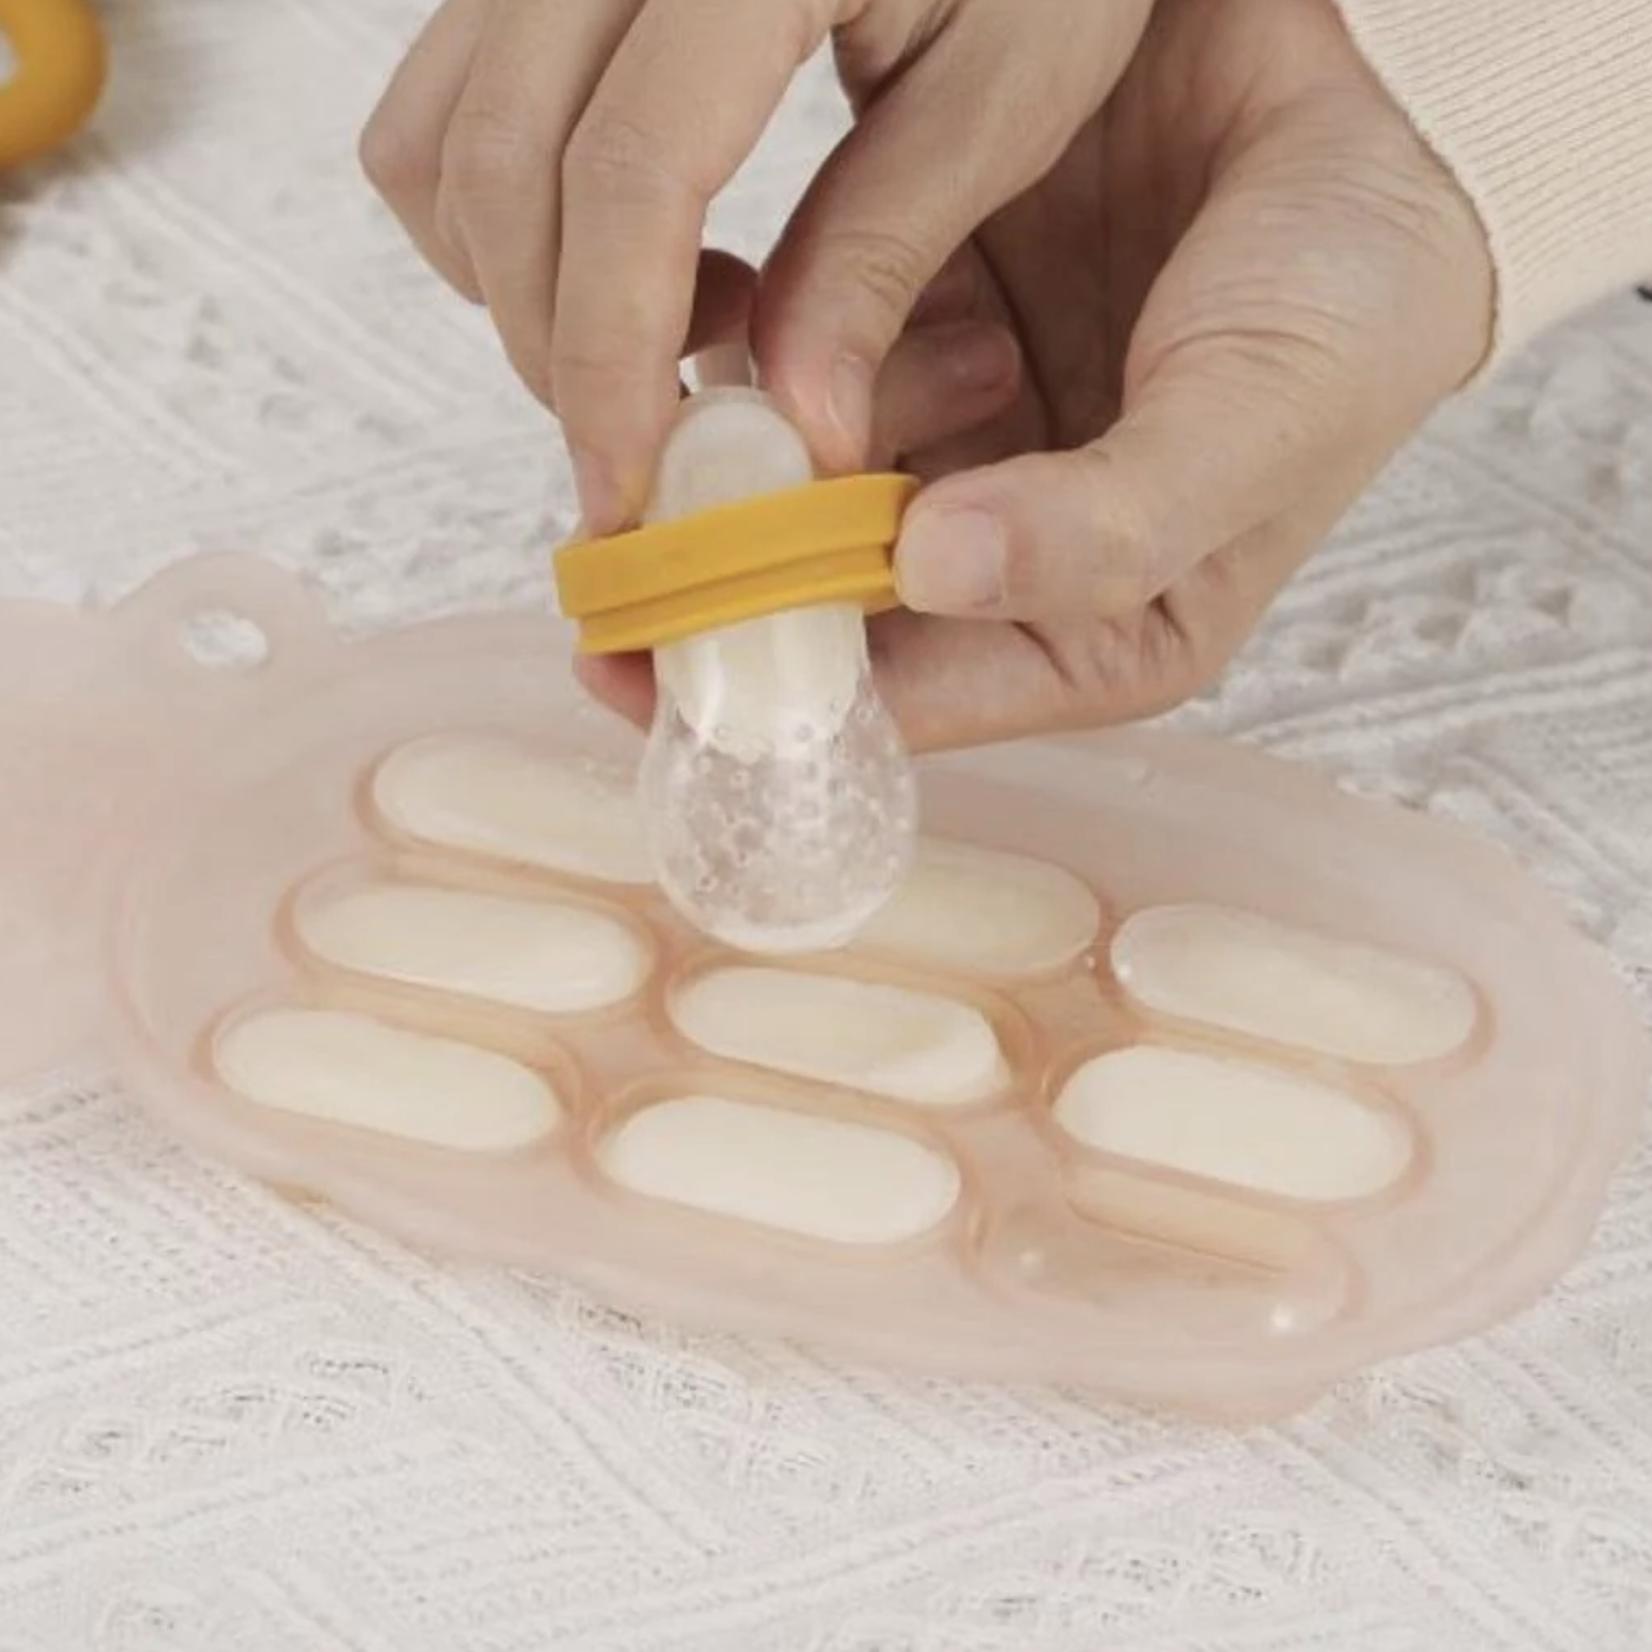 Haakaa Silicone Pineapple Nibble Tray-Blush(New)